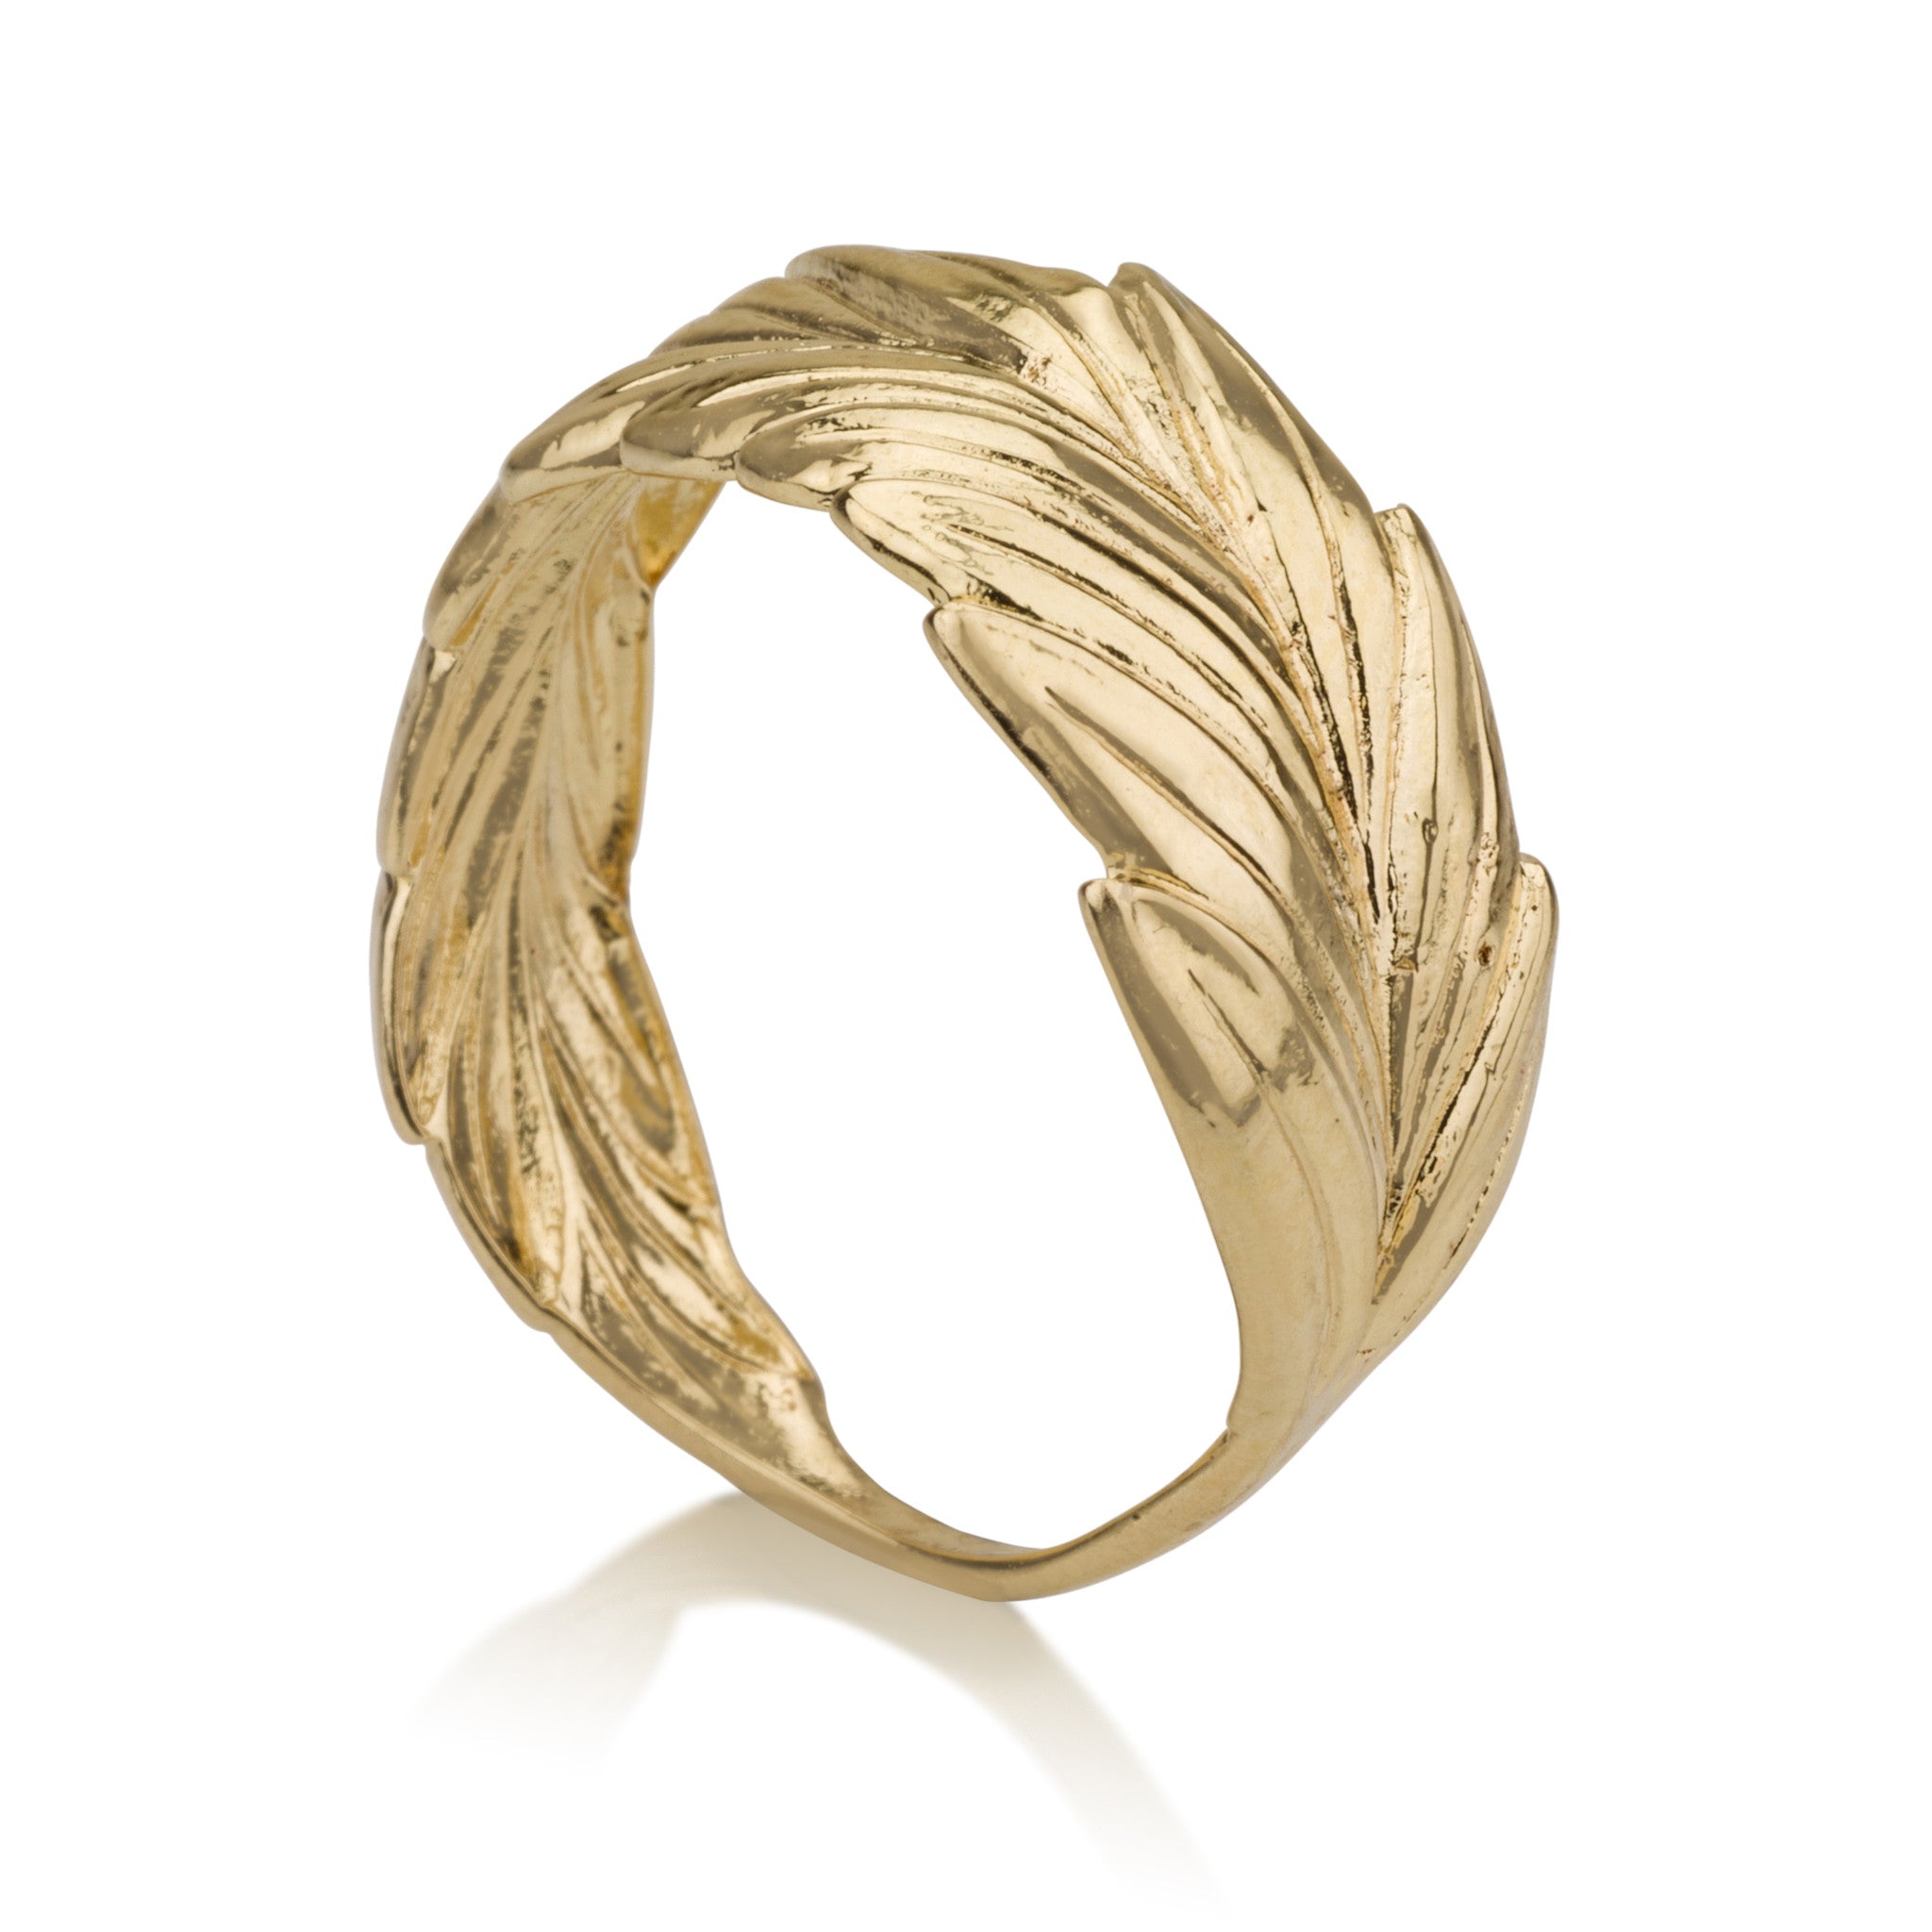 Rings - Feather Ring